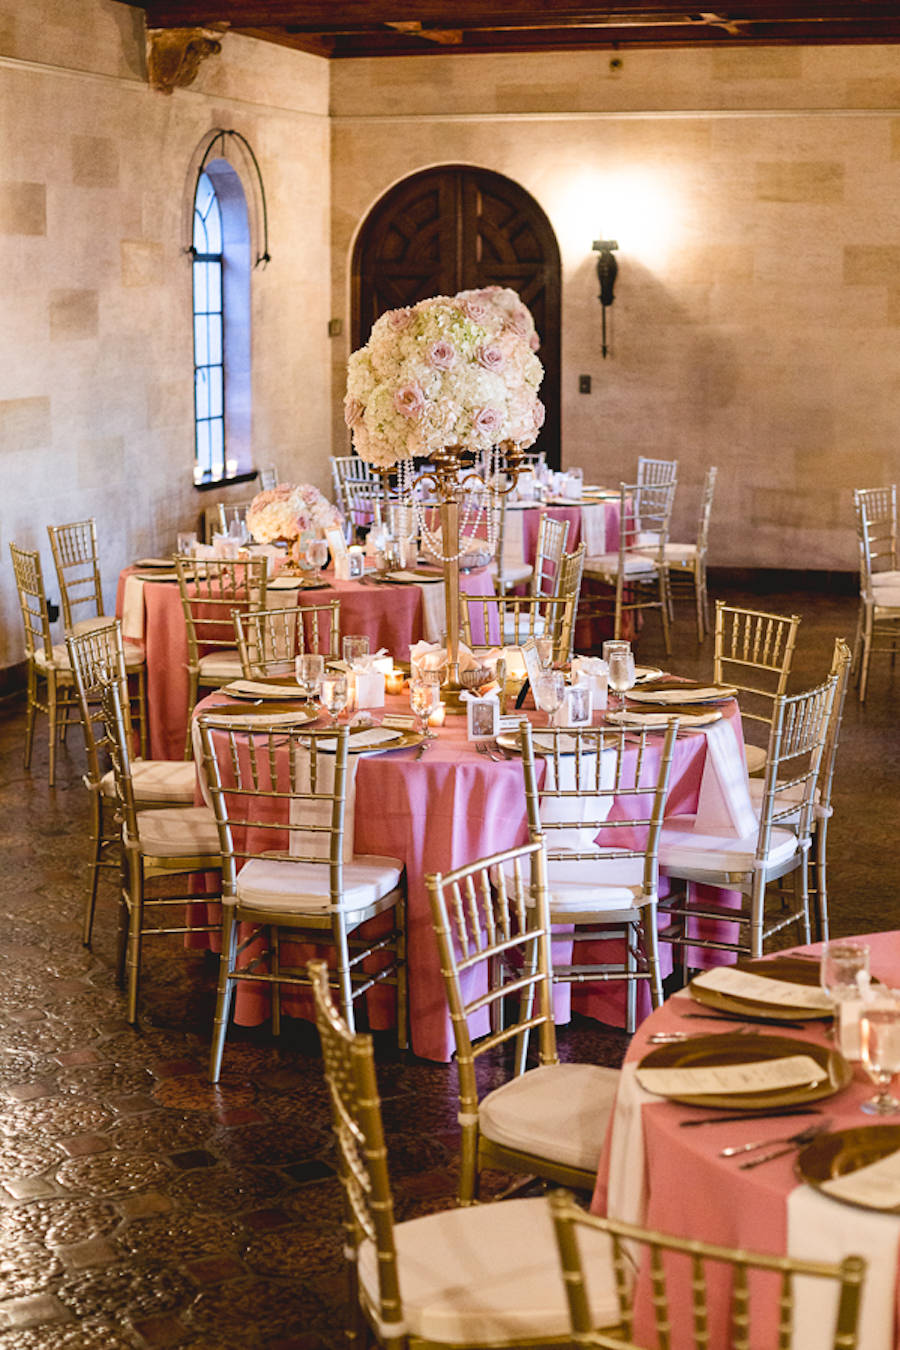 Gold Wedding Reception Decor with Tall Gold Centerpieces and Blush Pink Linens | Wedding Reception Decor Ideas and Inspiration